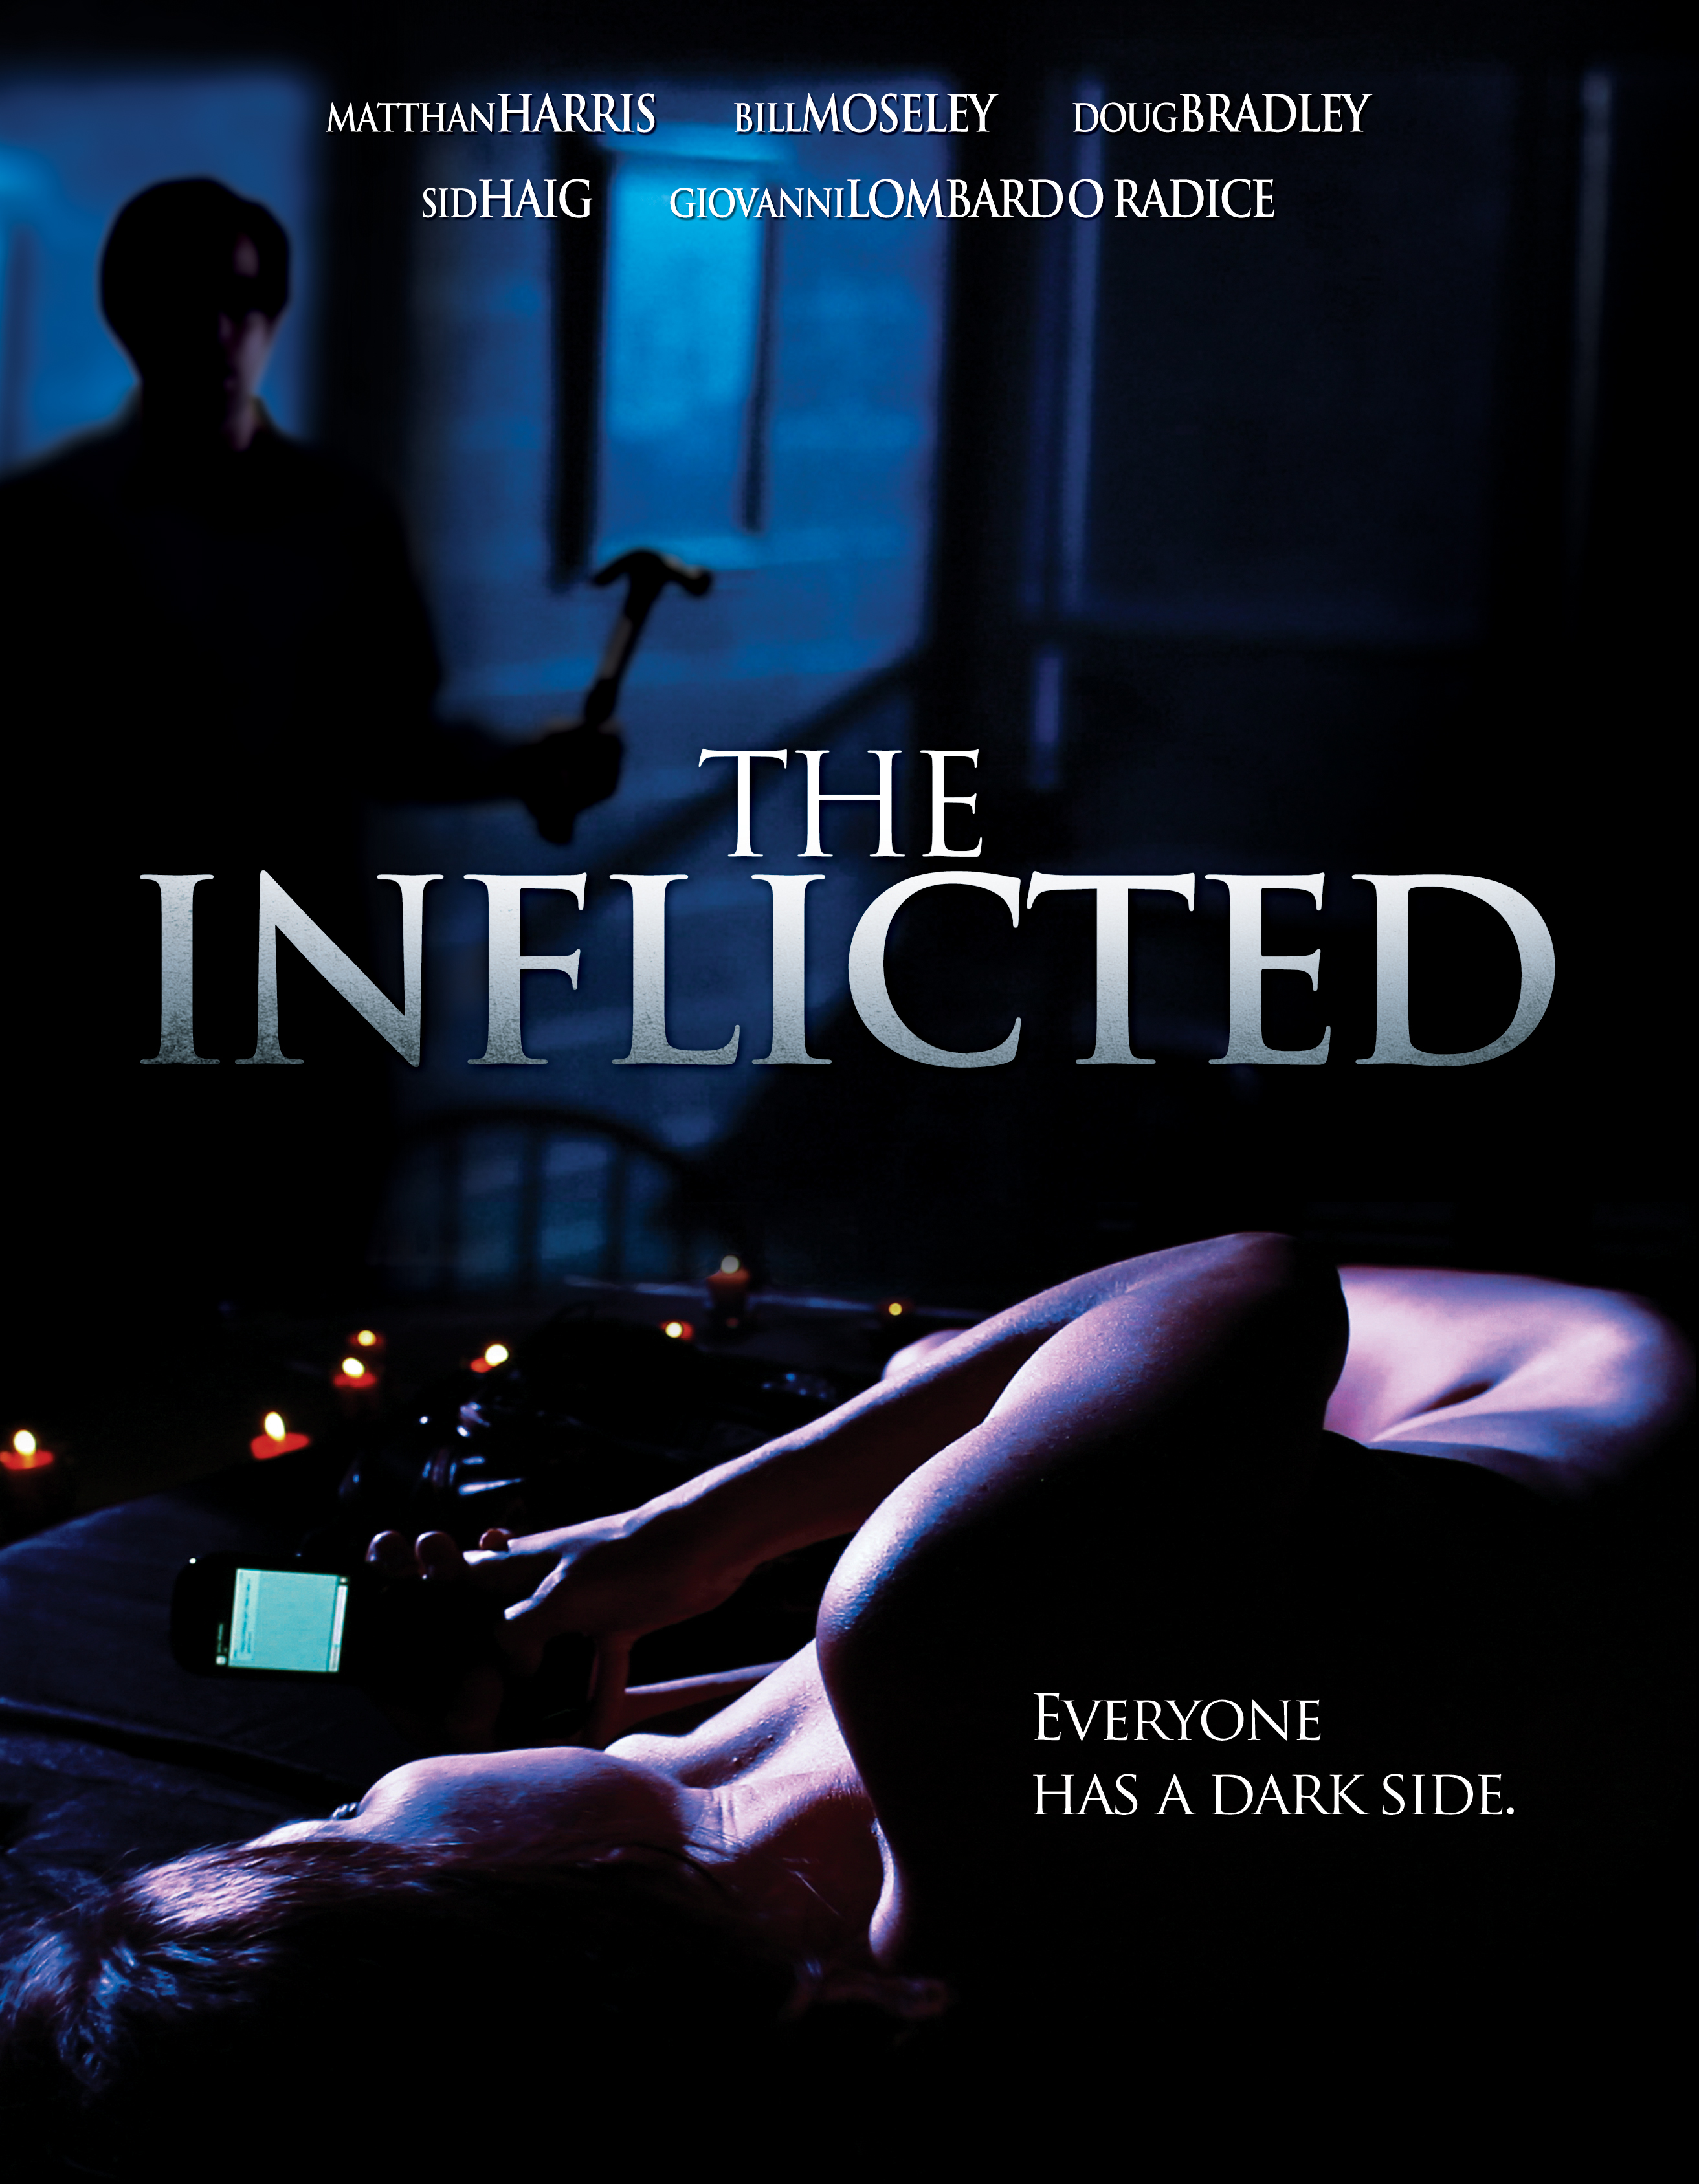 The Inflicted DVD cover art (Released 5/21/2013)